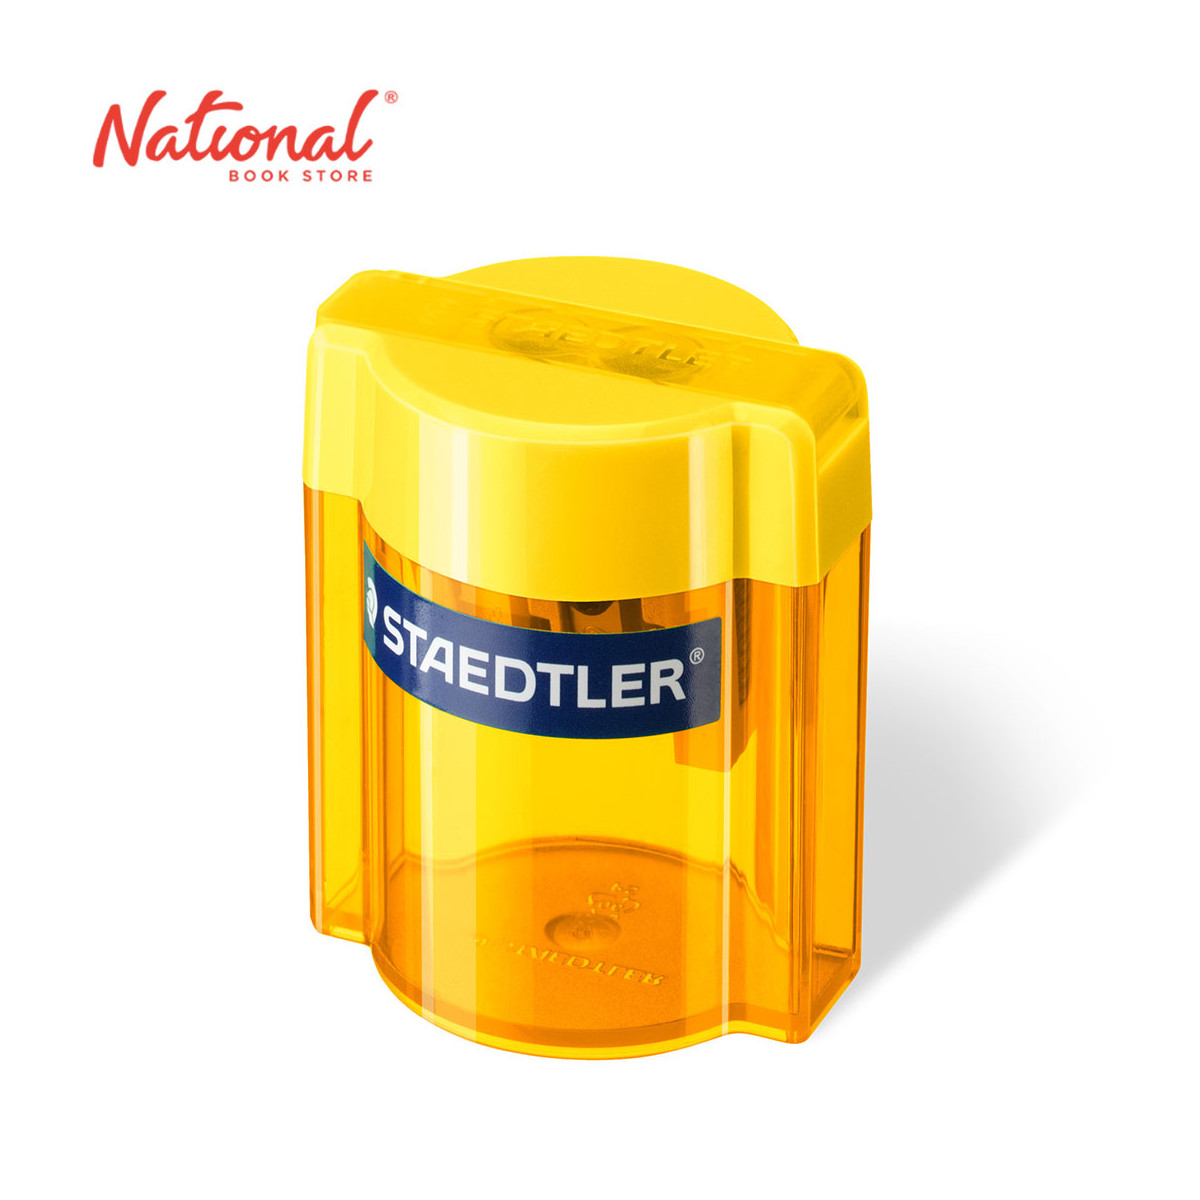 Staedtler Two-Hole Sharpener Tub Round Yellow 513 006 - School & Office Supplies - Cutting Devices